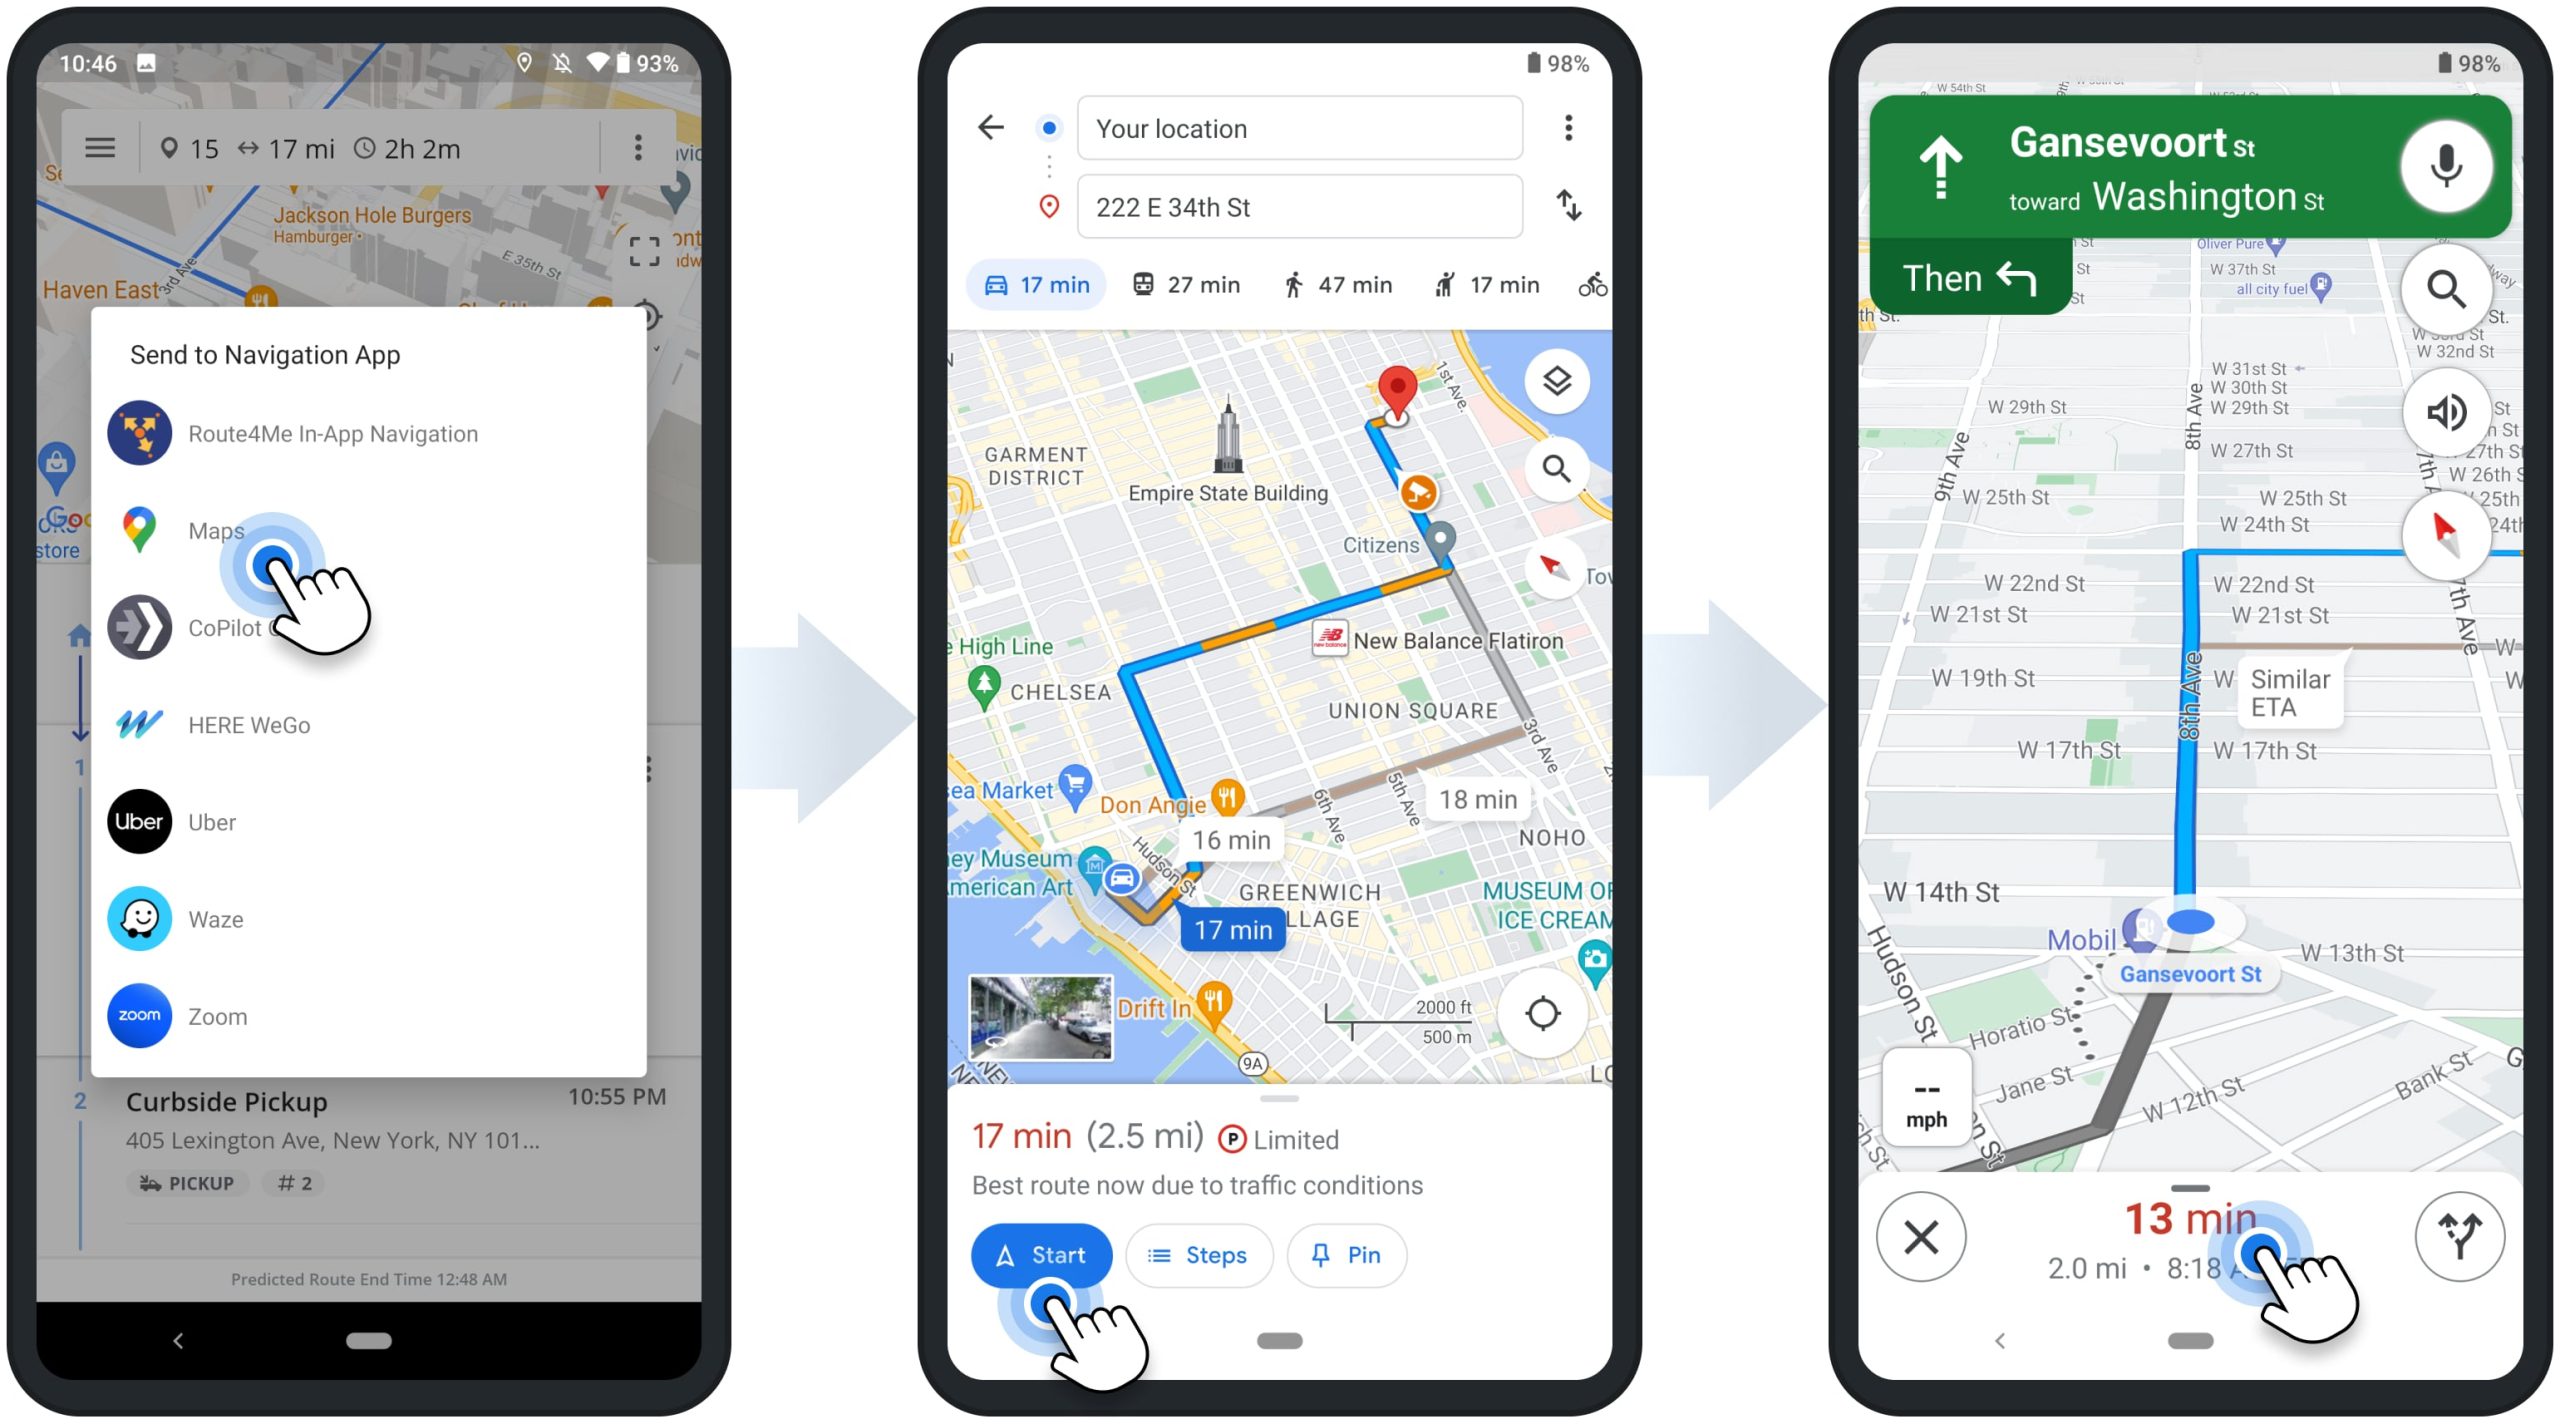 Google Maps route planner GPS navigation for navigating sequenced routes from Route4Me Android Route Planner app for drivers.